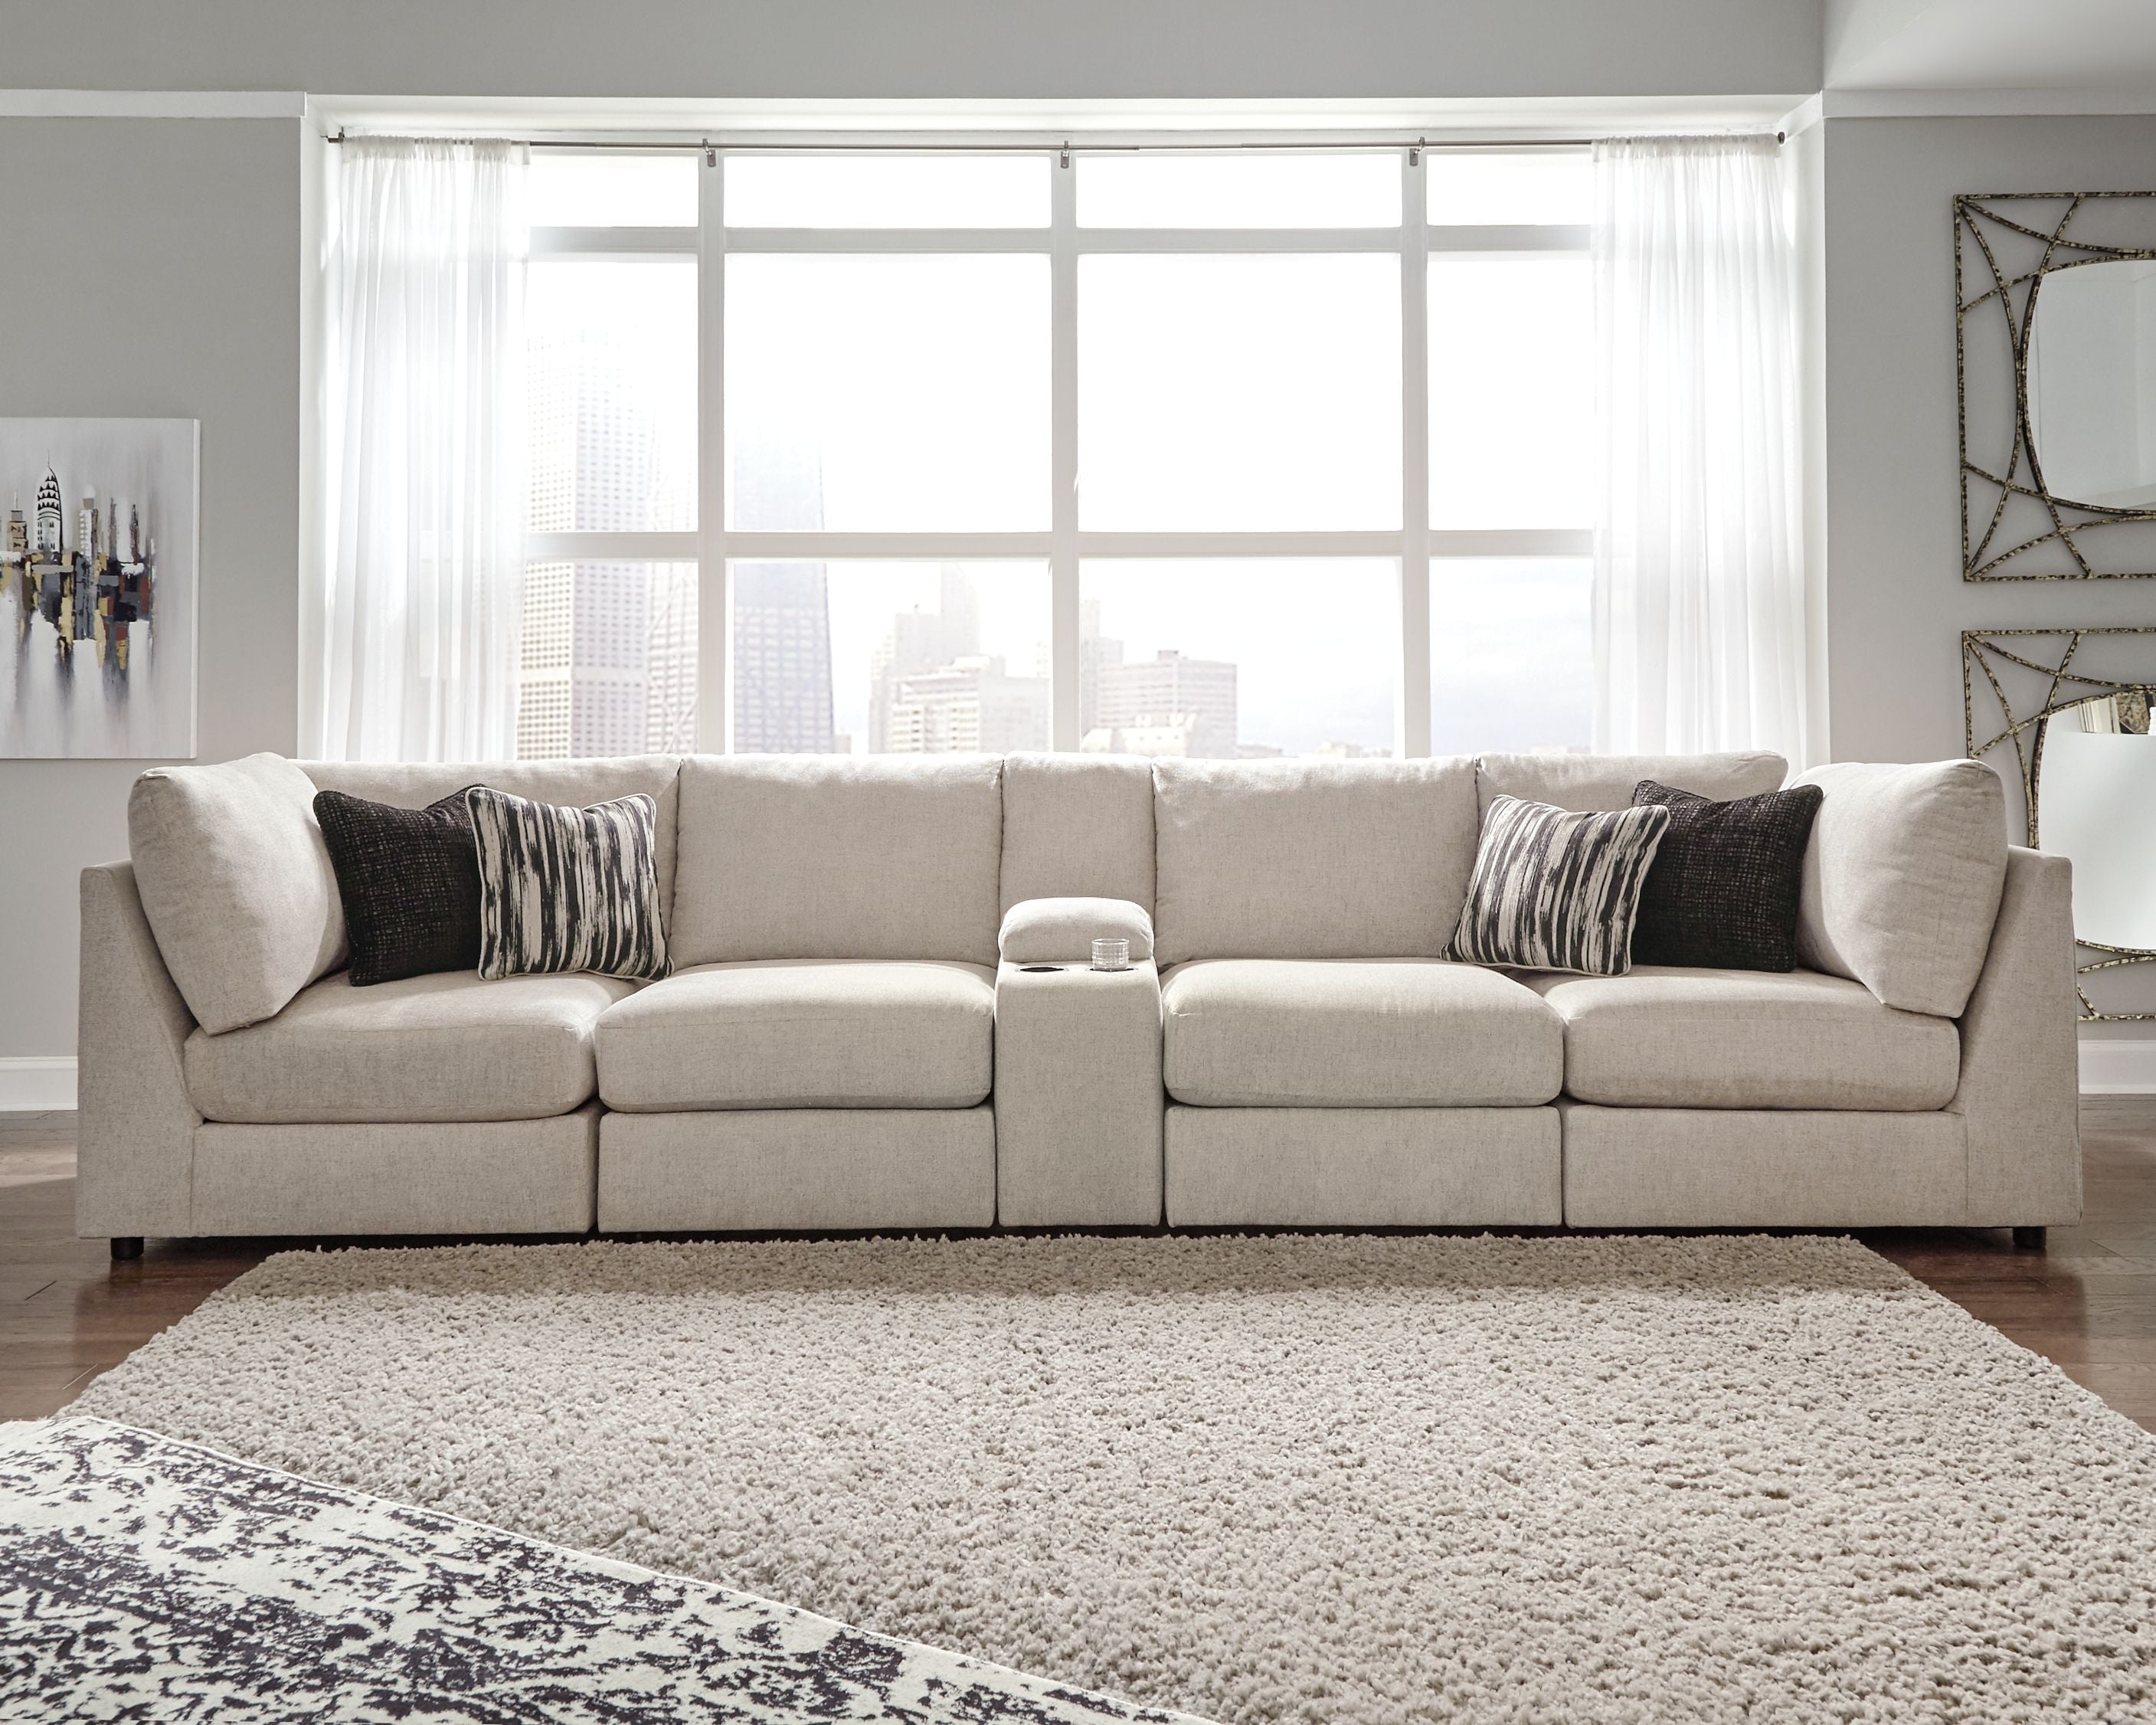 Kellway - Sectional-Stationary Sectionals-American Furniture Outlet